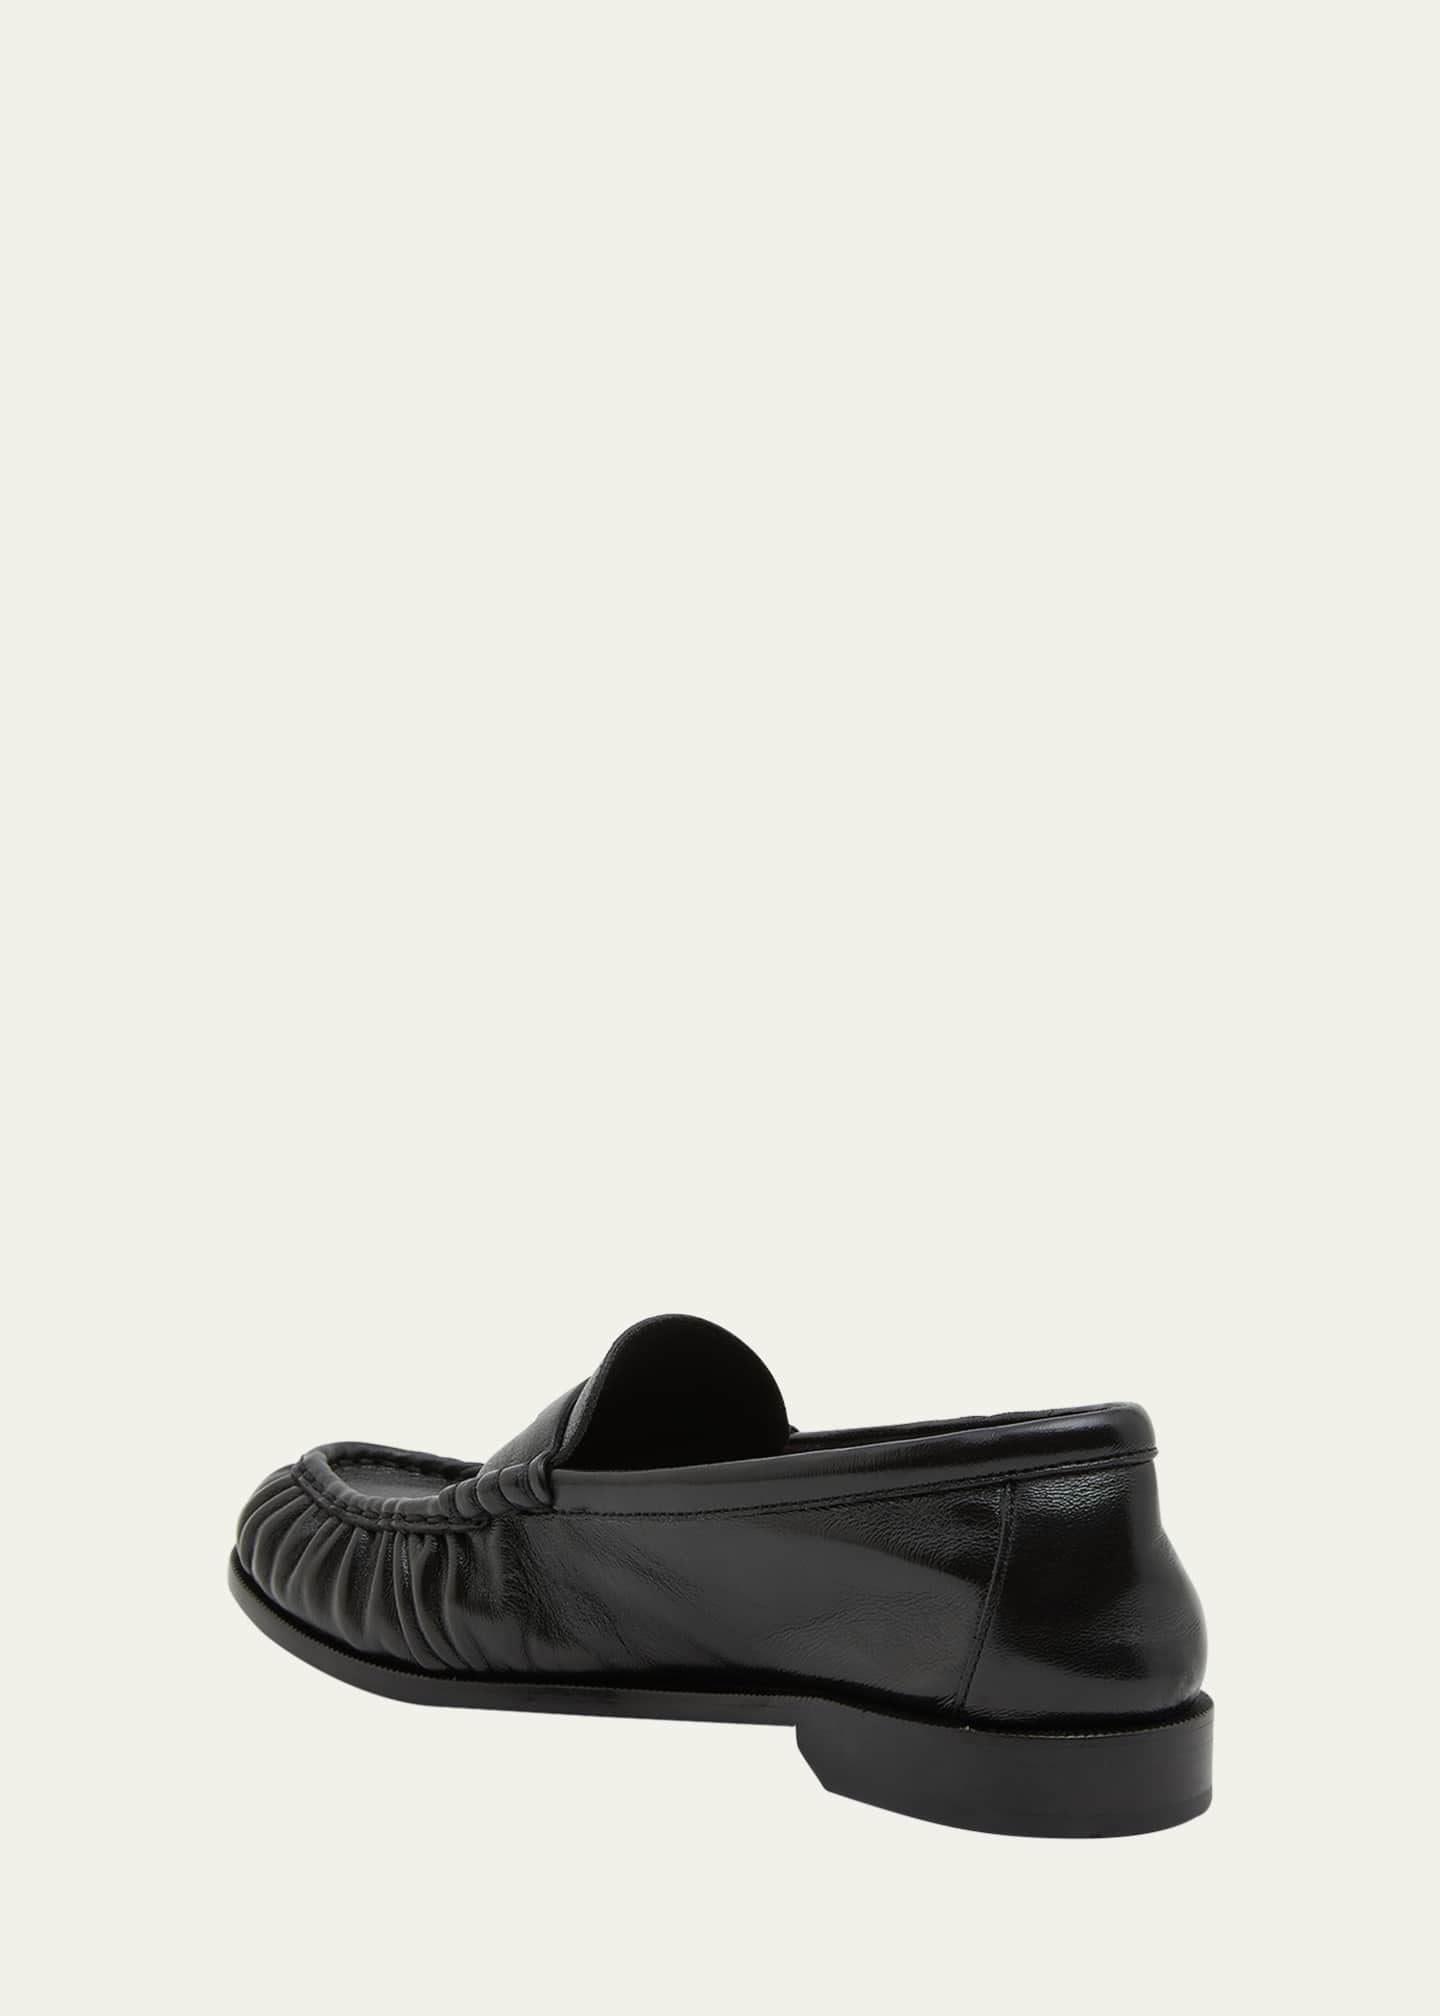 Saint Laurent Le Leather YSL Penny Loafers - Bergdorf Goodman